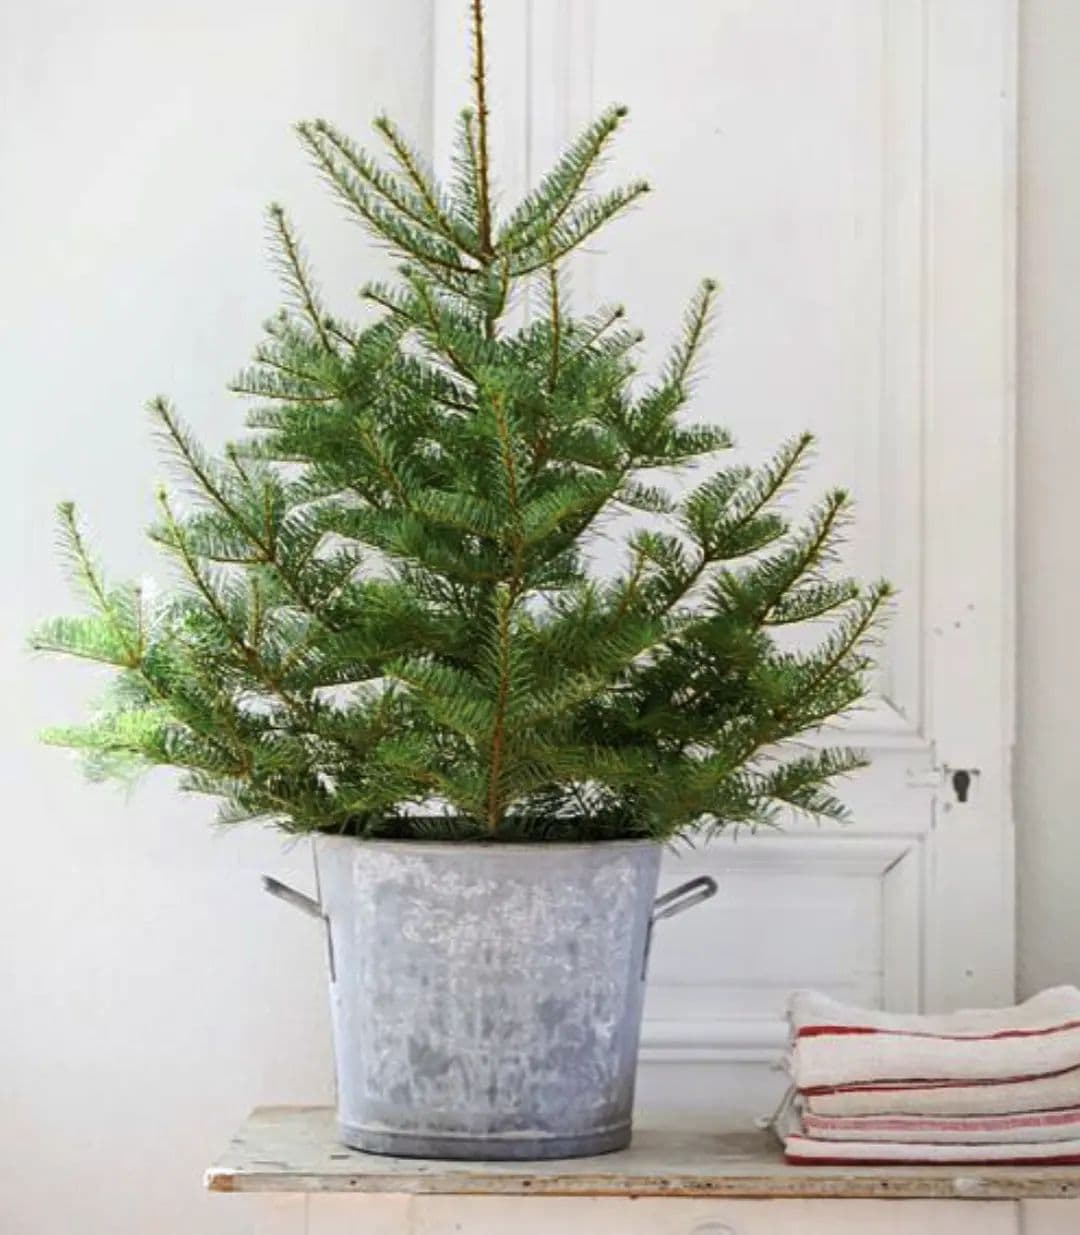 Natural Christmas tree idea featuring a galvanized base cover